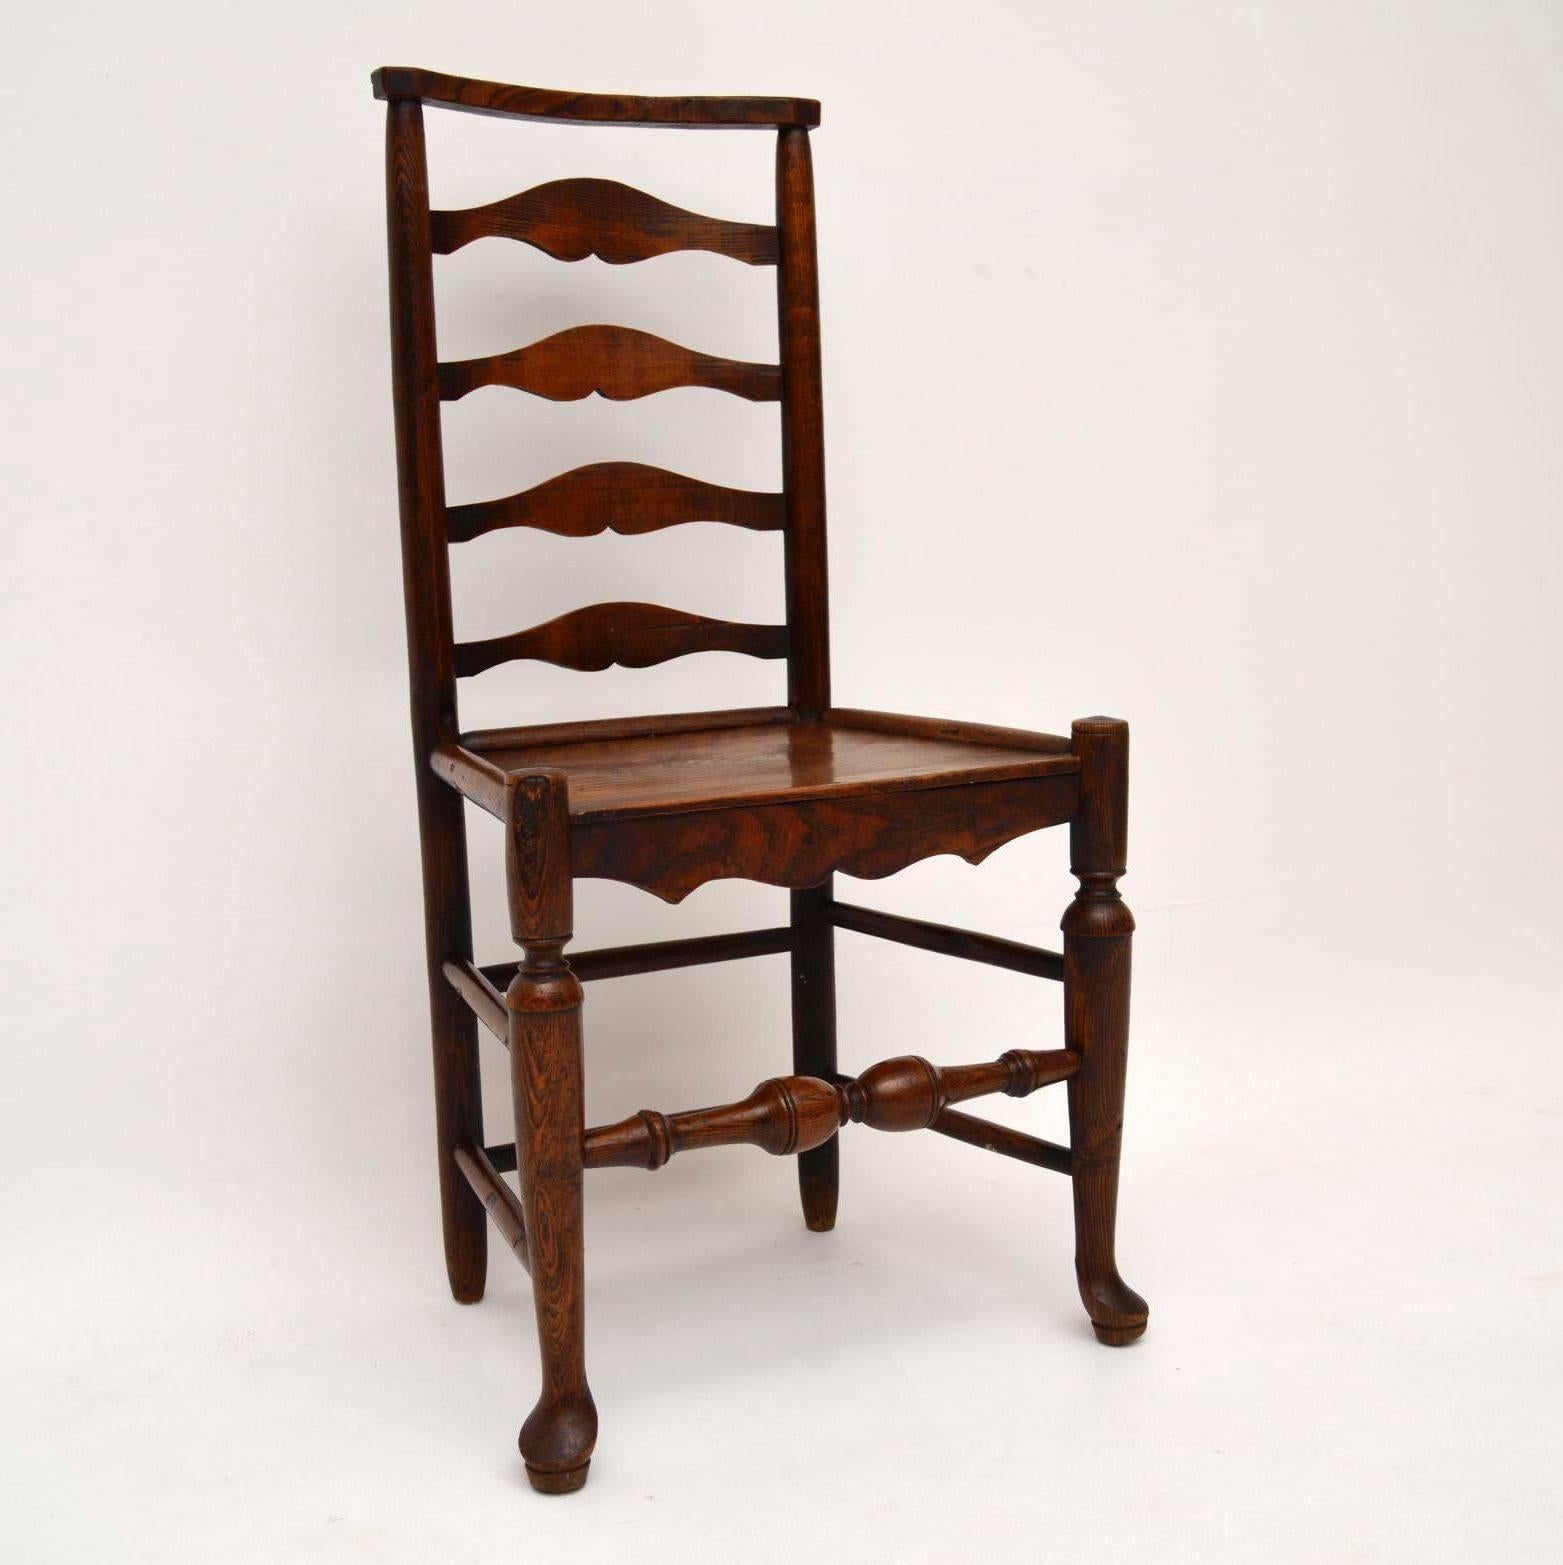 Single antique period country chair in elm & ash, dating from around the 1750-1780s period and in good original condition. This chair is sturdy and has a lovely original colour and patina.

Measures: Width - 19.7', 50 cm
Depth - 15.8",